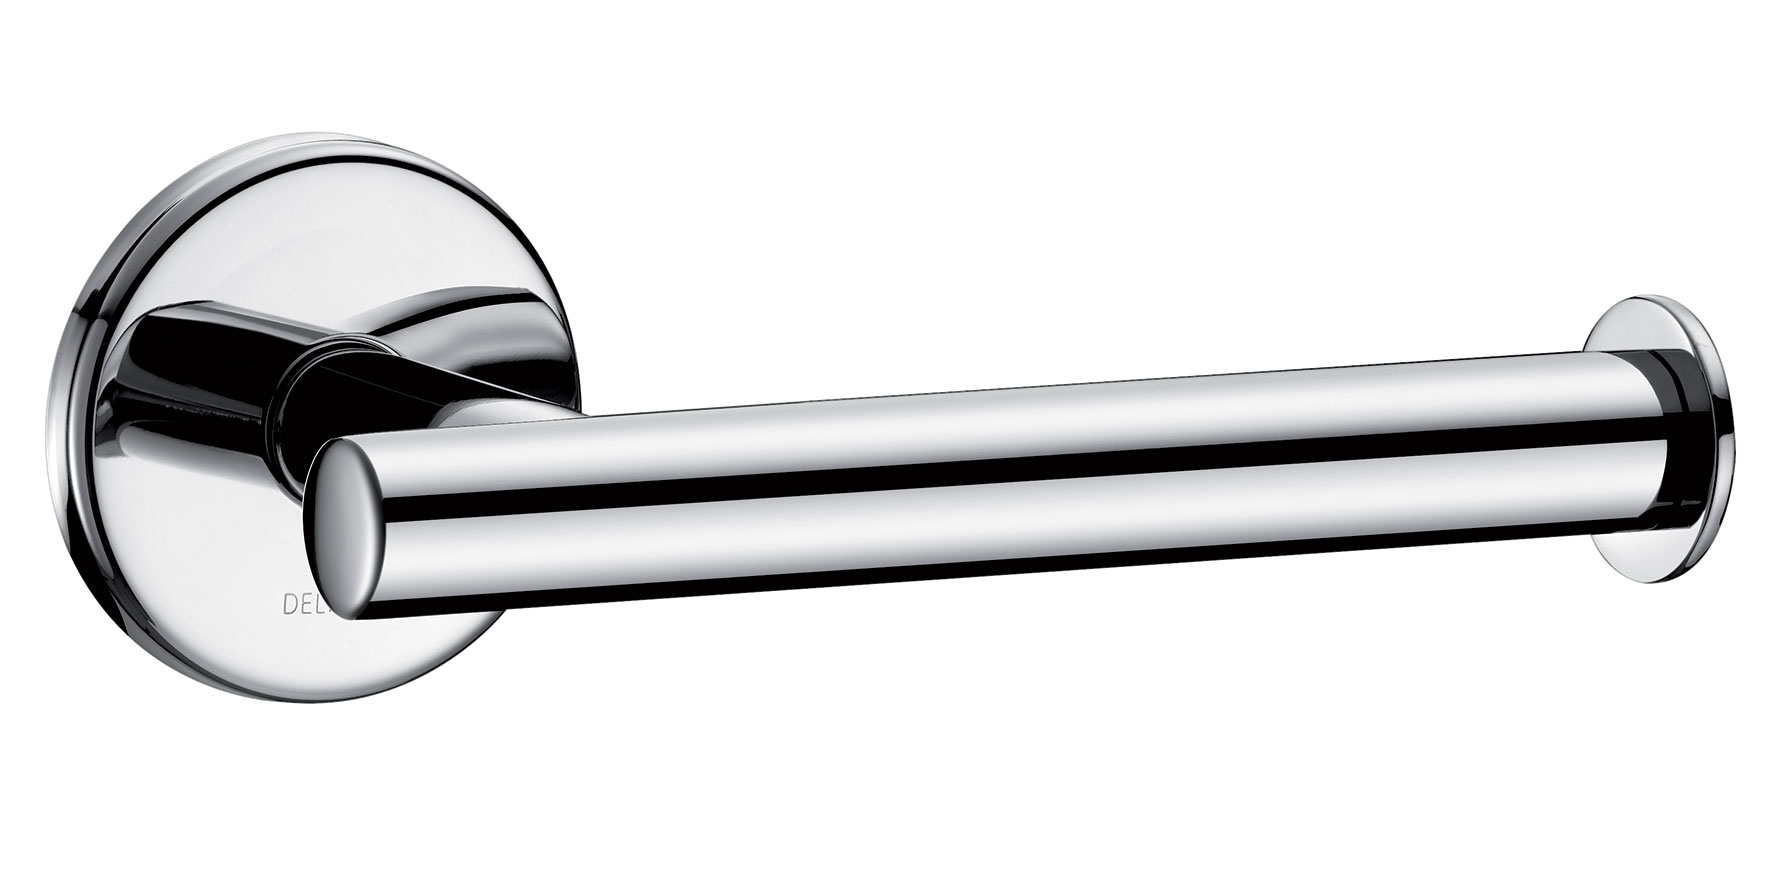 Delabie single toilet roll holder, bright polished stainless steel